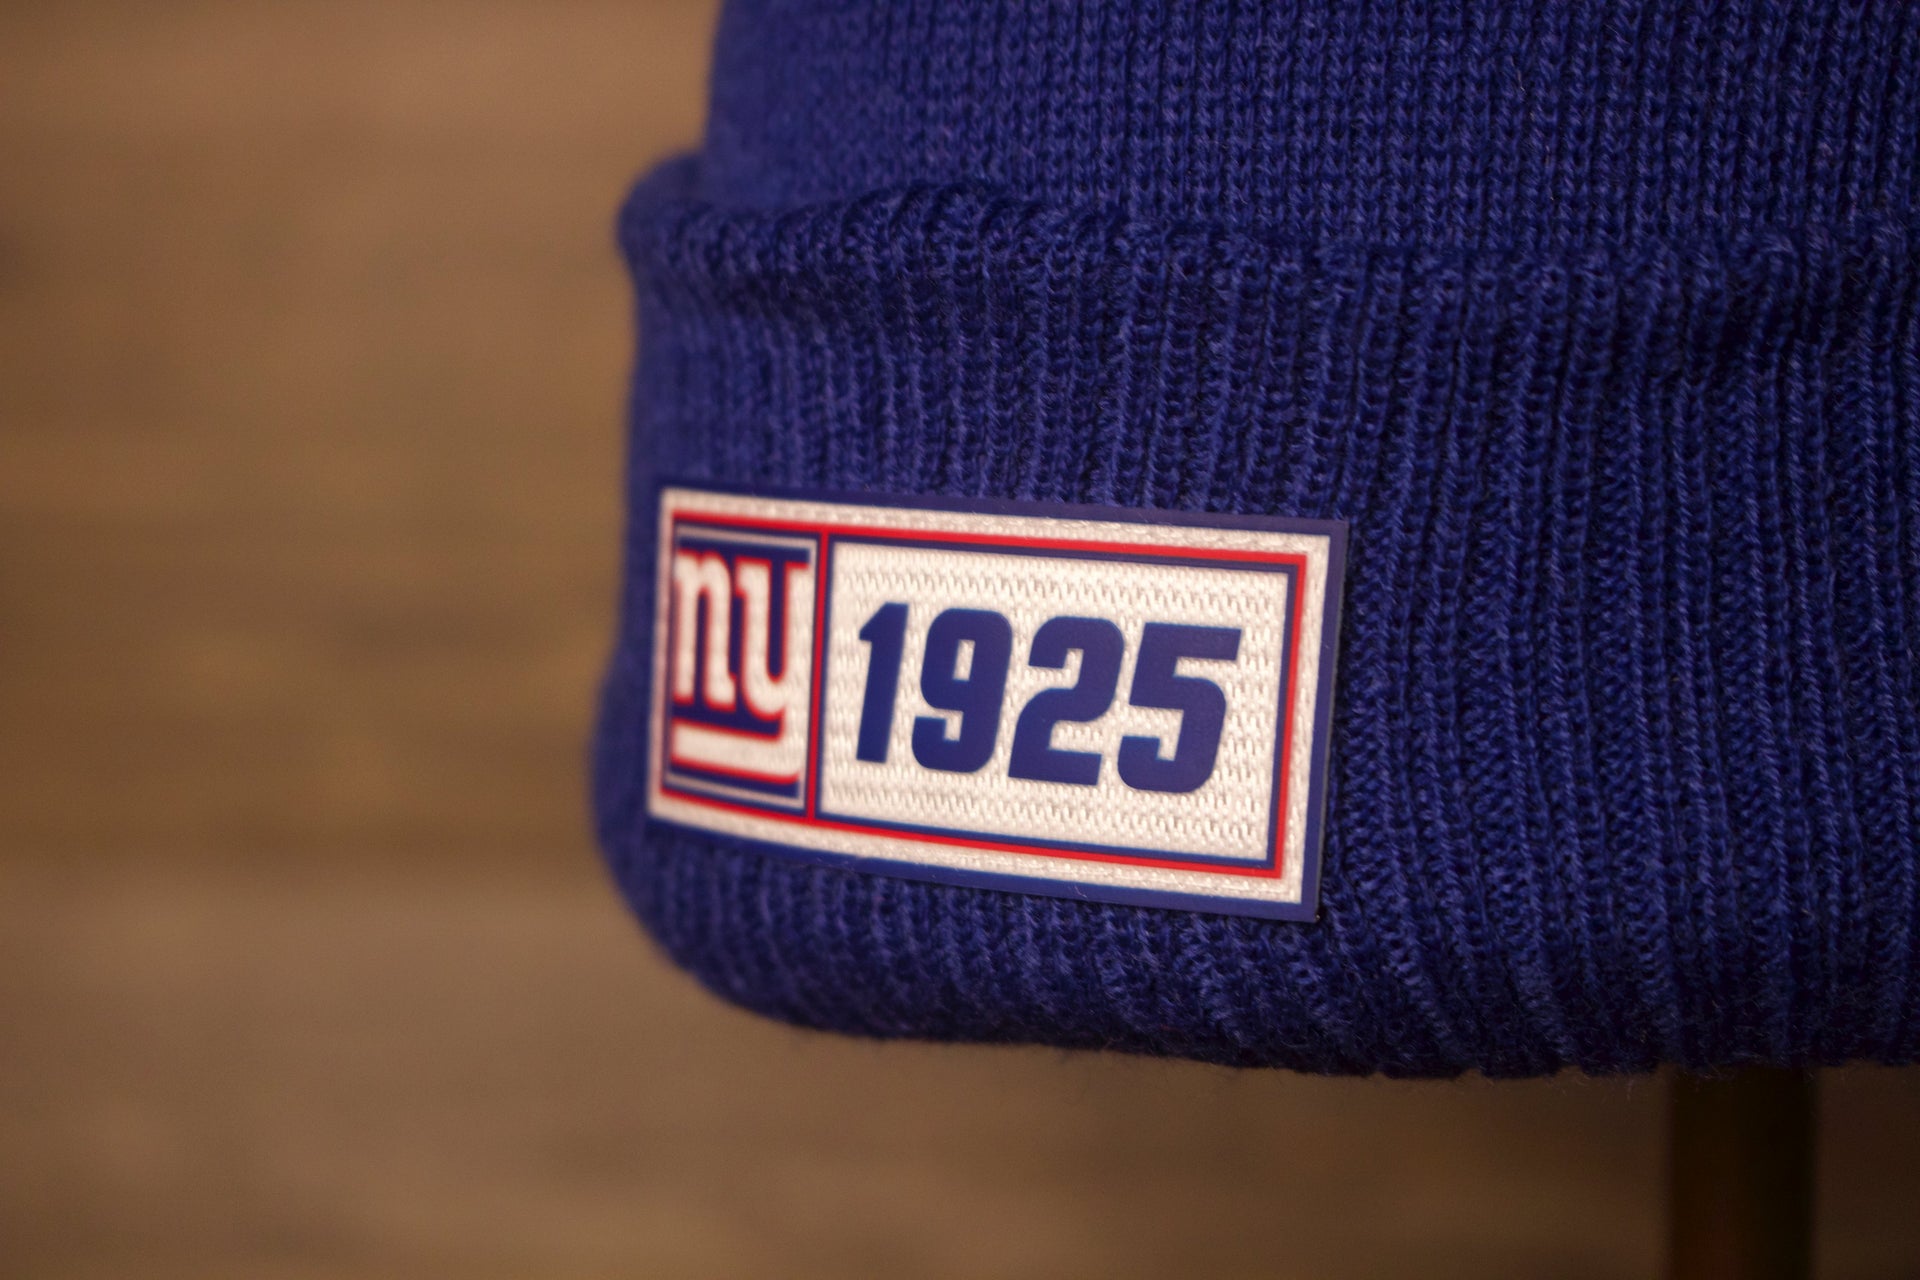 the year the giants were founded was 1925 Which is shown on the patch on the front Giants Beanie | New York Giants 2019 On-Field Beanie | Giants Blue Winter Hat